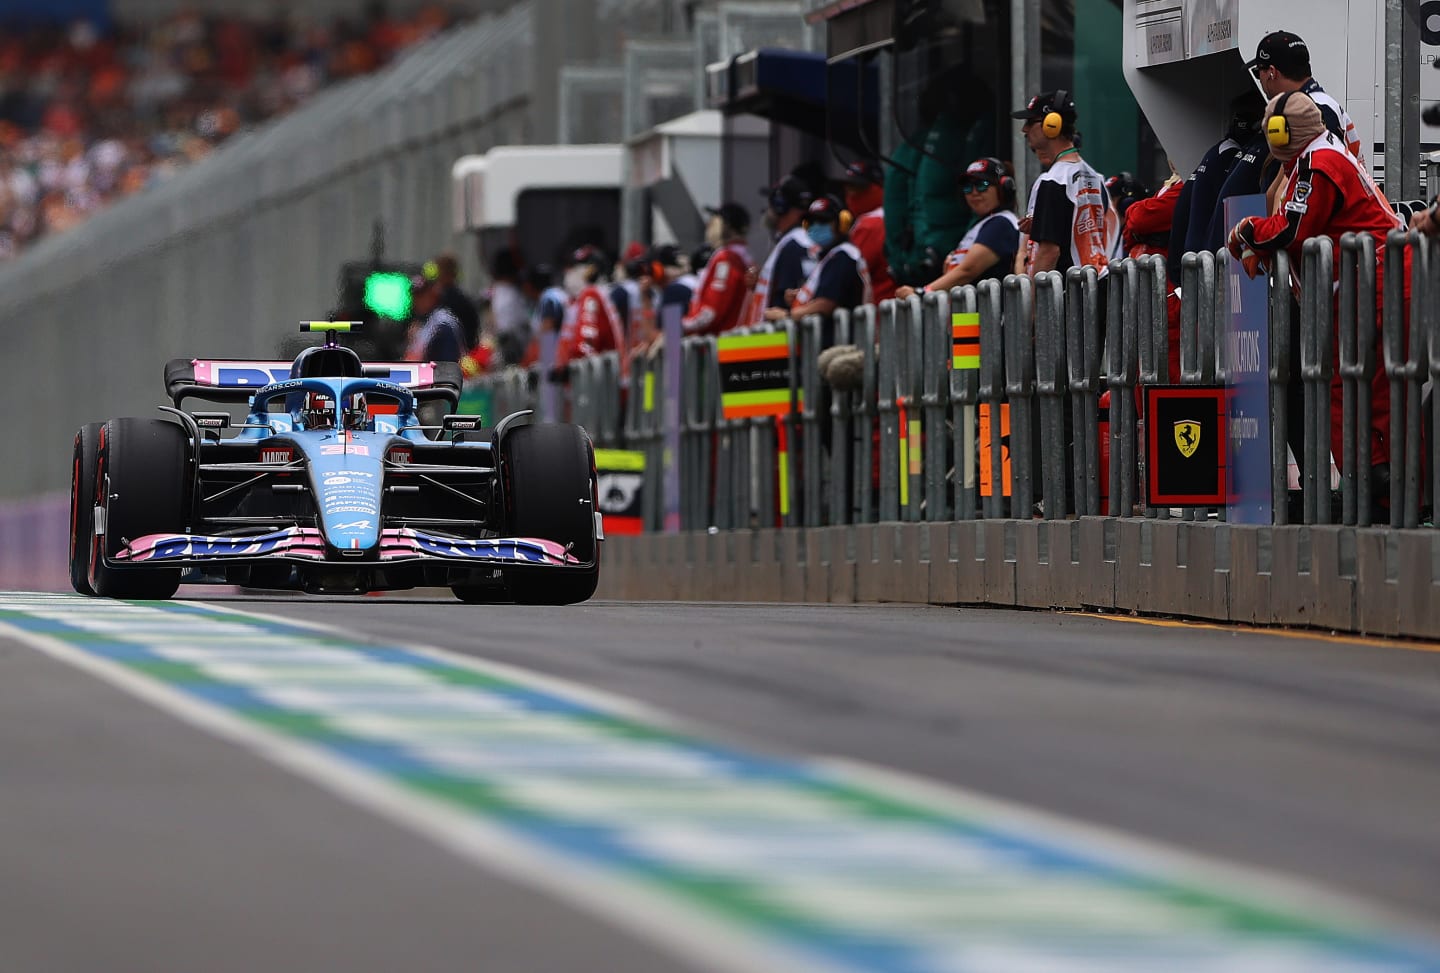 MELBOURNE, AUSTRALIA - APRIL 09: Esteban Ocon of France driving the (31) Alpine F1 A522 Renault in the Pitlane during final practice ahead of the F1 Grand Prix of Australia at Melbourne Grand Prix Circuit on April 09, 2022 in Melbourne, Australia. (Photo by Robert Cianflone/Getty Images)